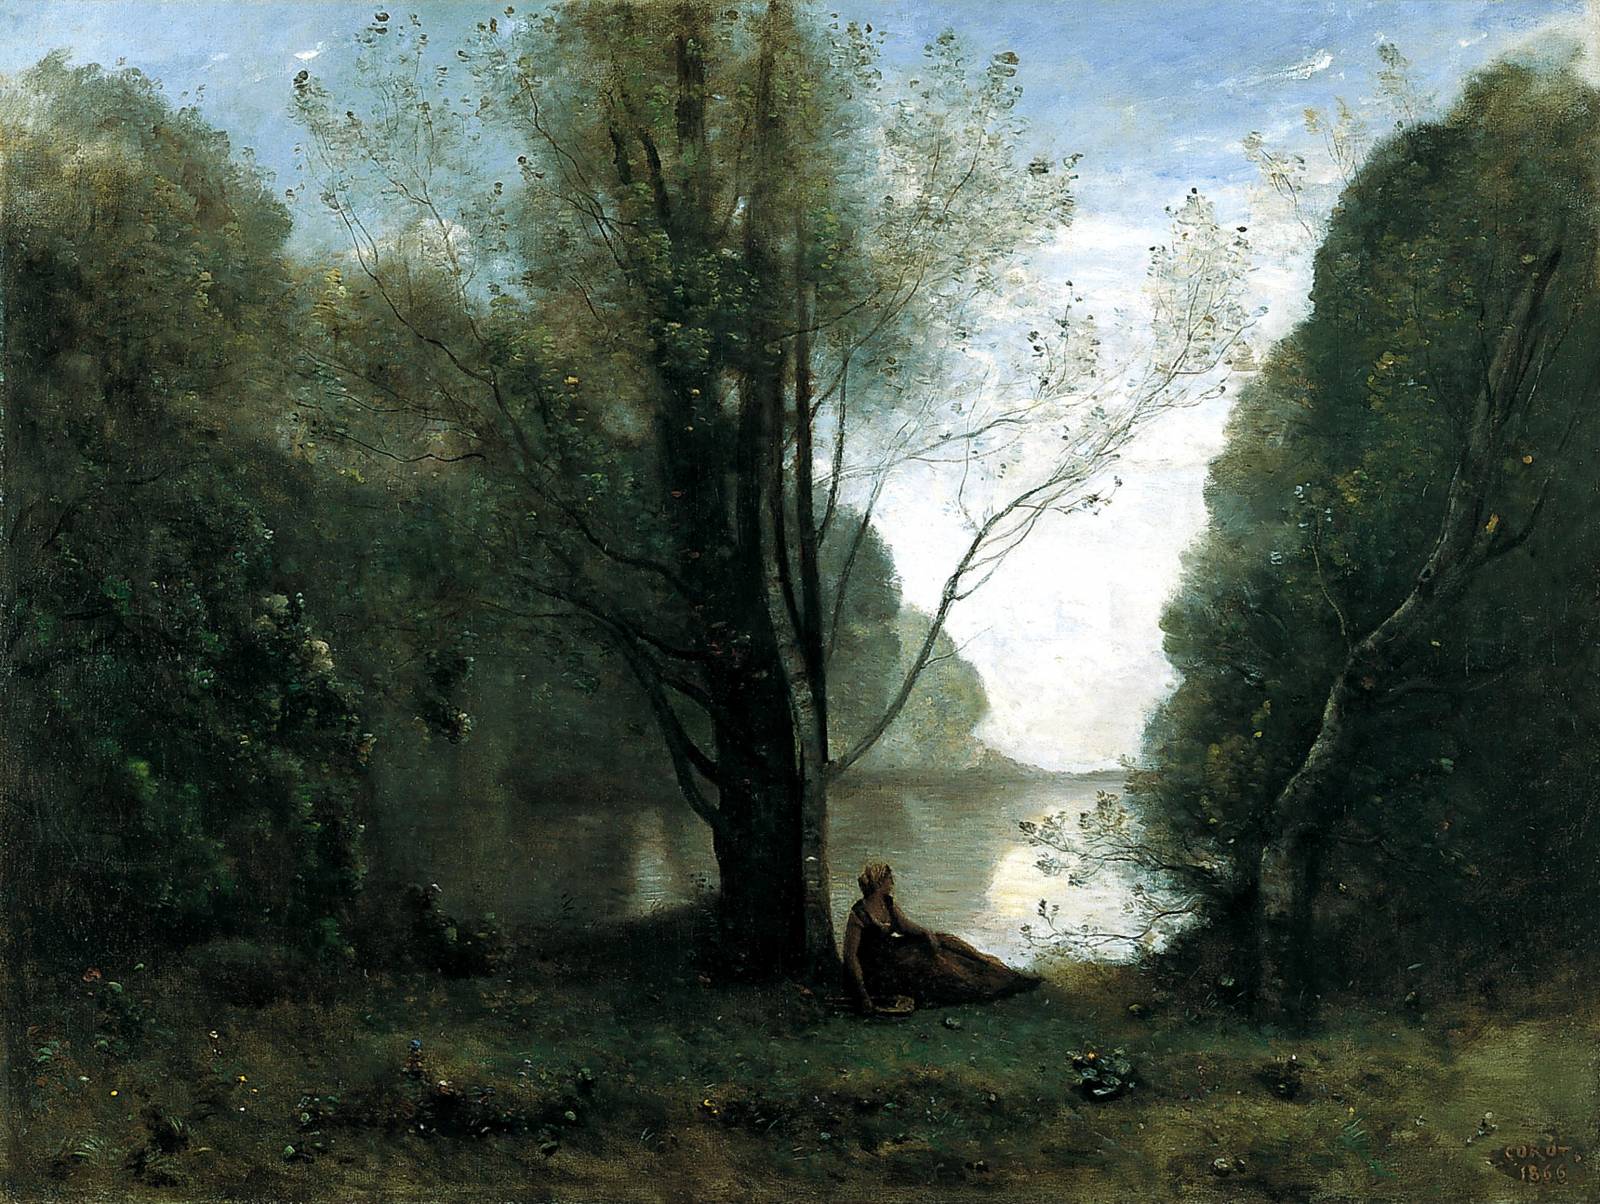 jean-baptiste-camille_corot_-_the_solitude_recollection_of_vigen_limousin_-_google_art_project.jpg